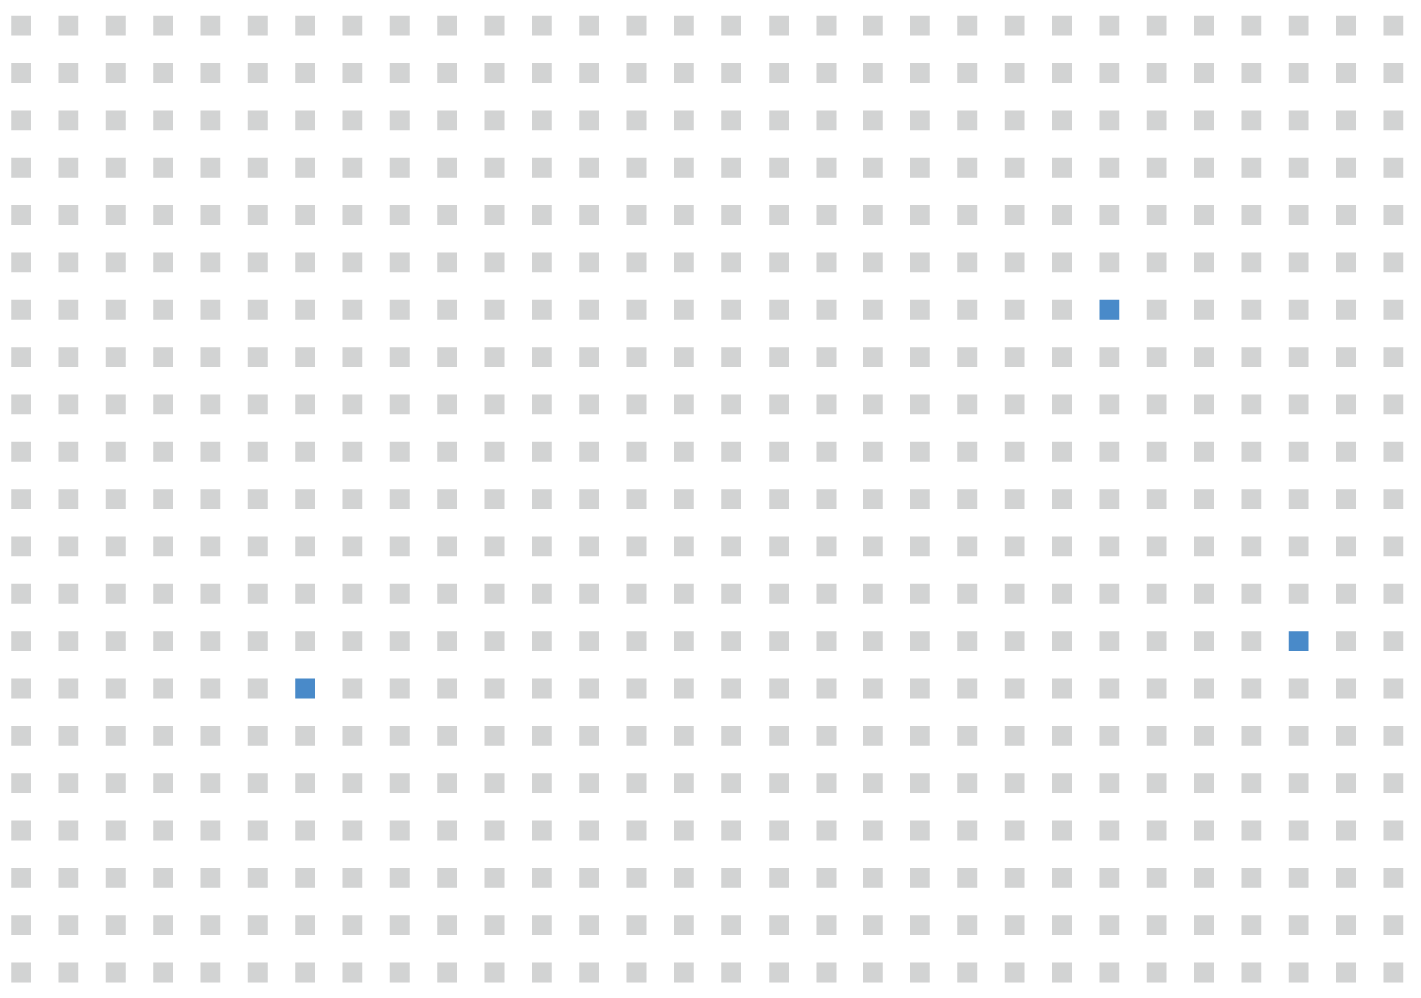 Dense grid of hundreds of squares, with three squares singled out and shaded blue. The rest are all a faint gray.